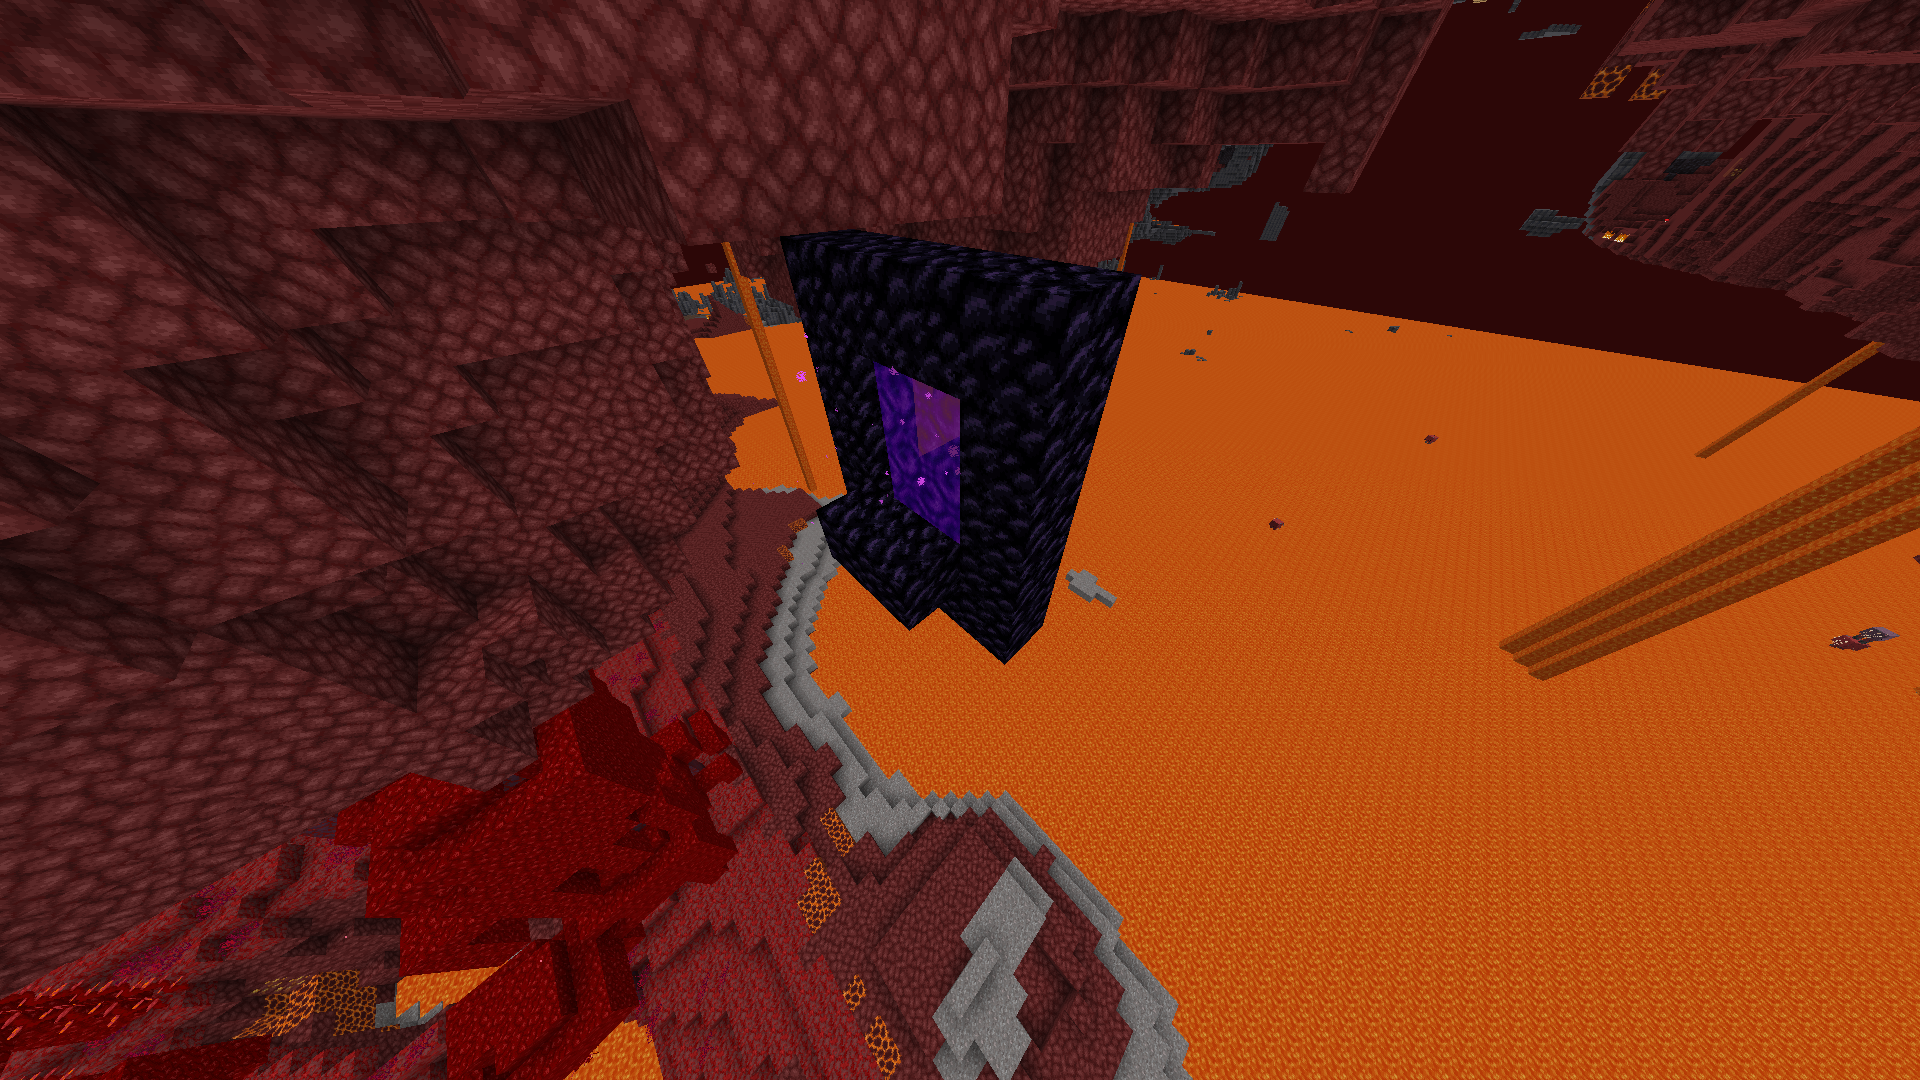 Nether Portal in the Nether